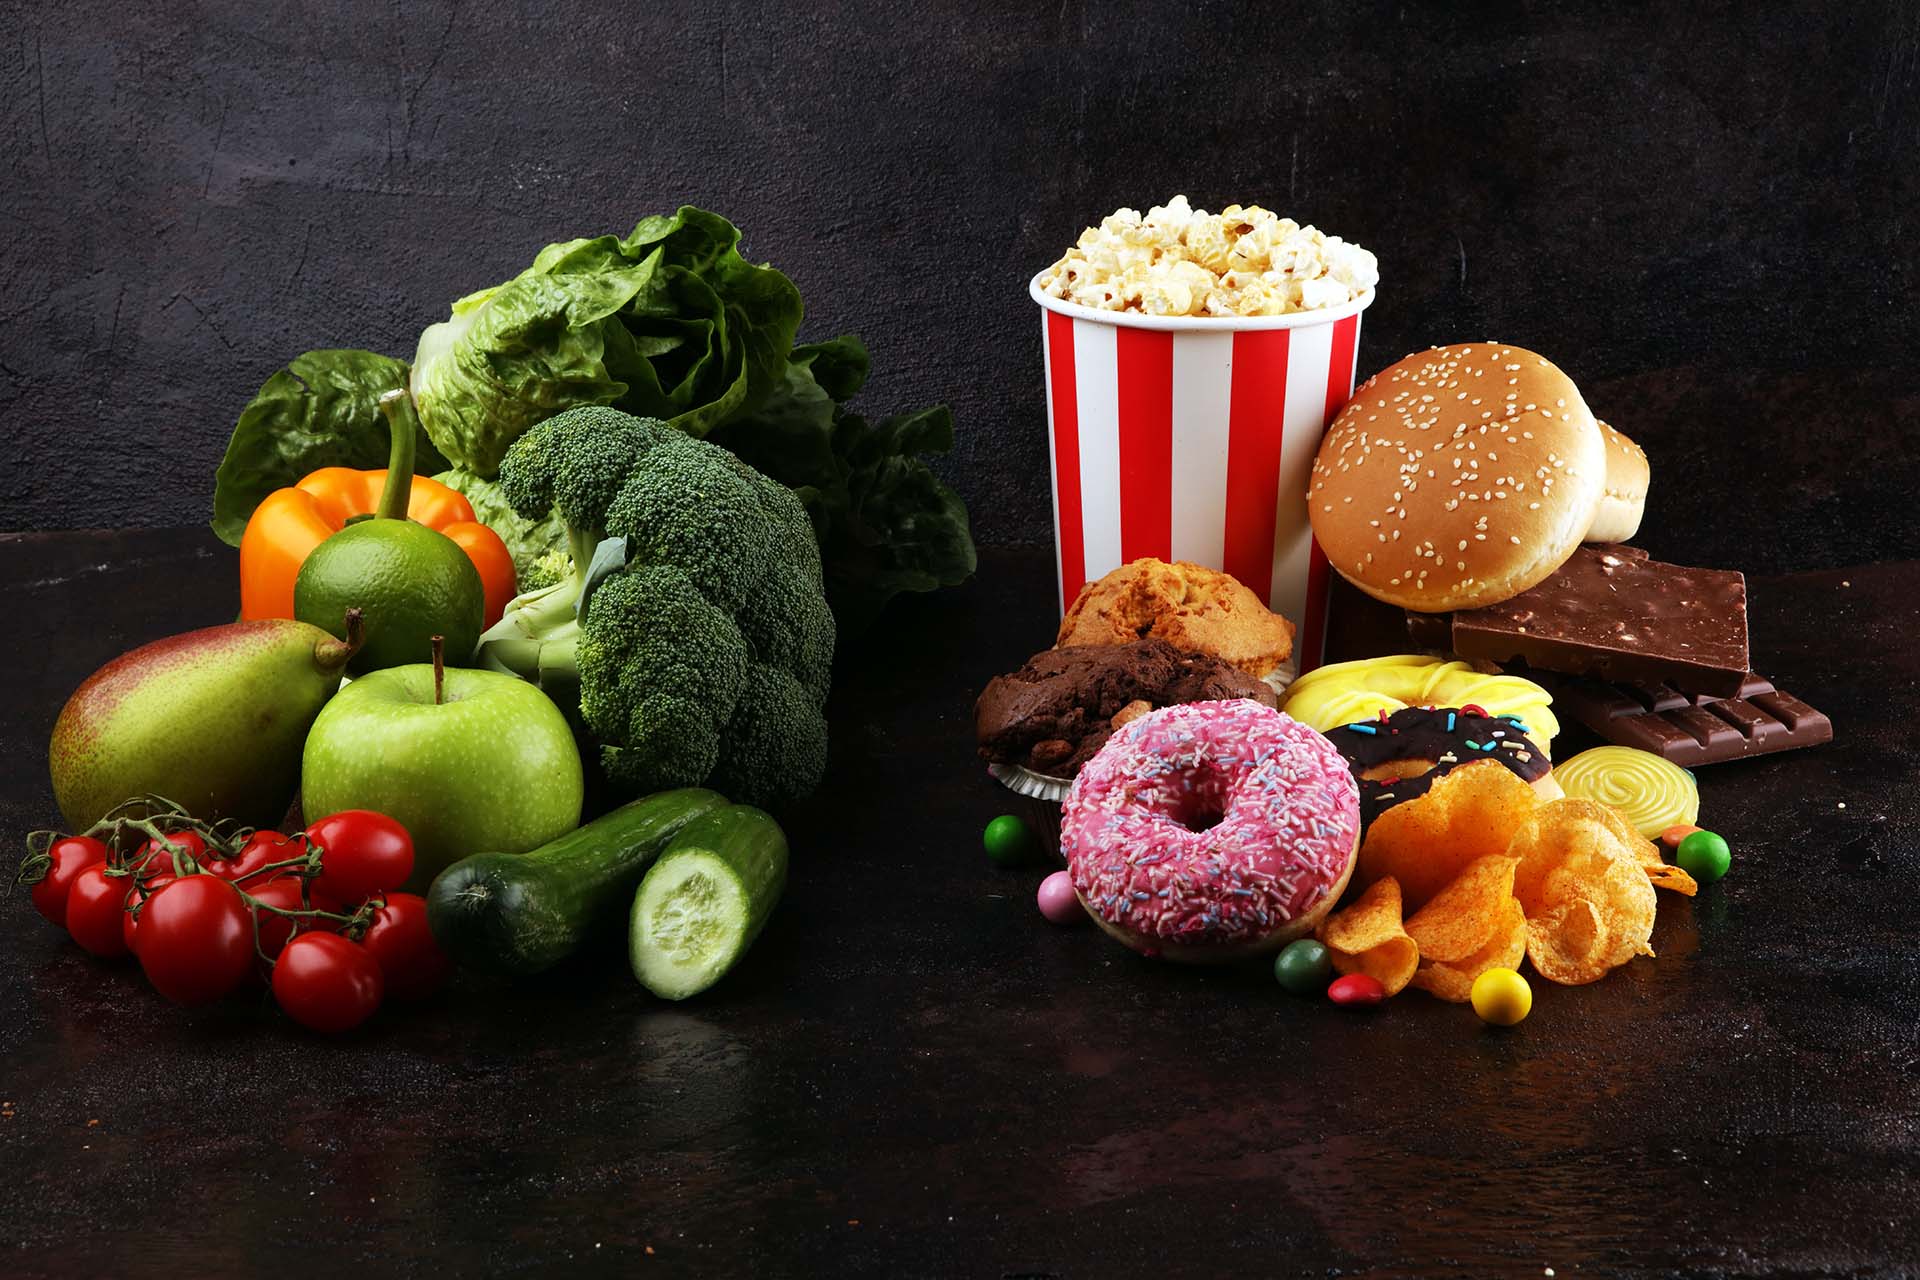 Concept photo of healthy and unhealthy food. Fruits and vegetables vs donuts,sweets and burgers on dark